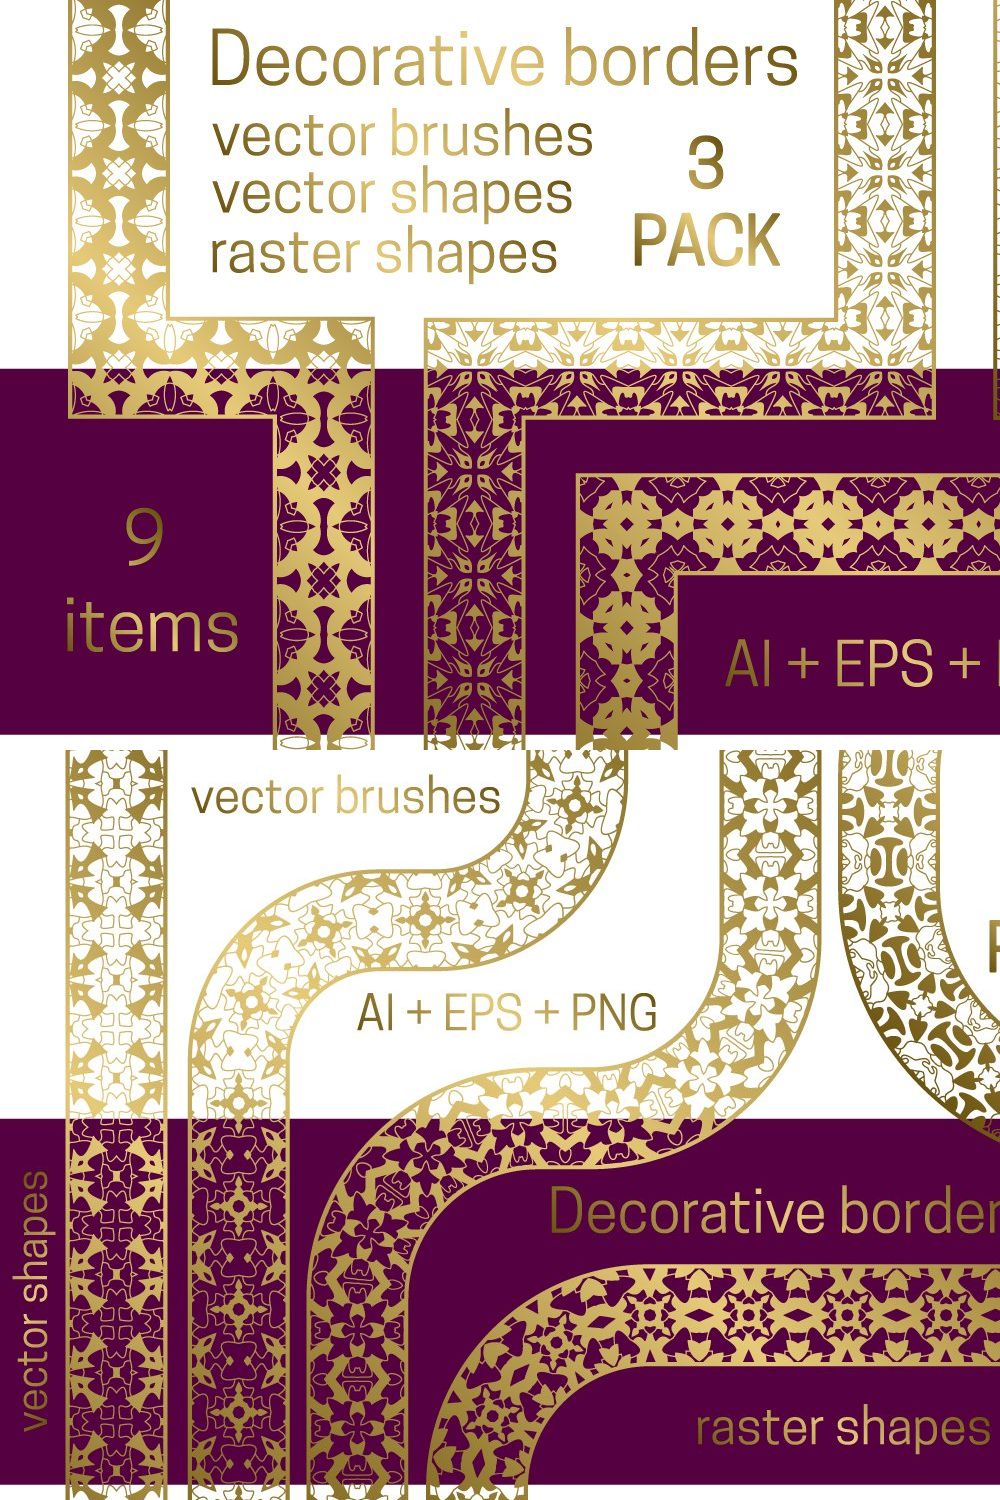 Decorative borders pack 3 pinterest preview image.